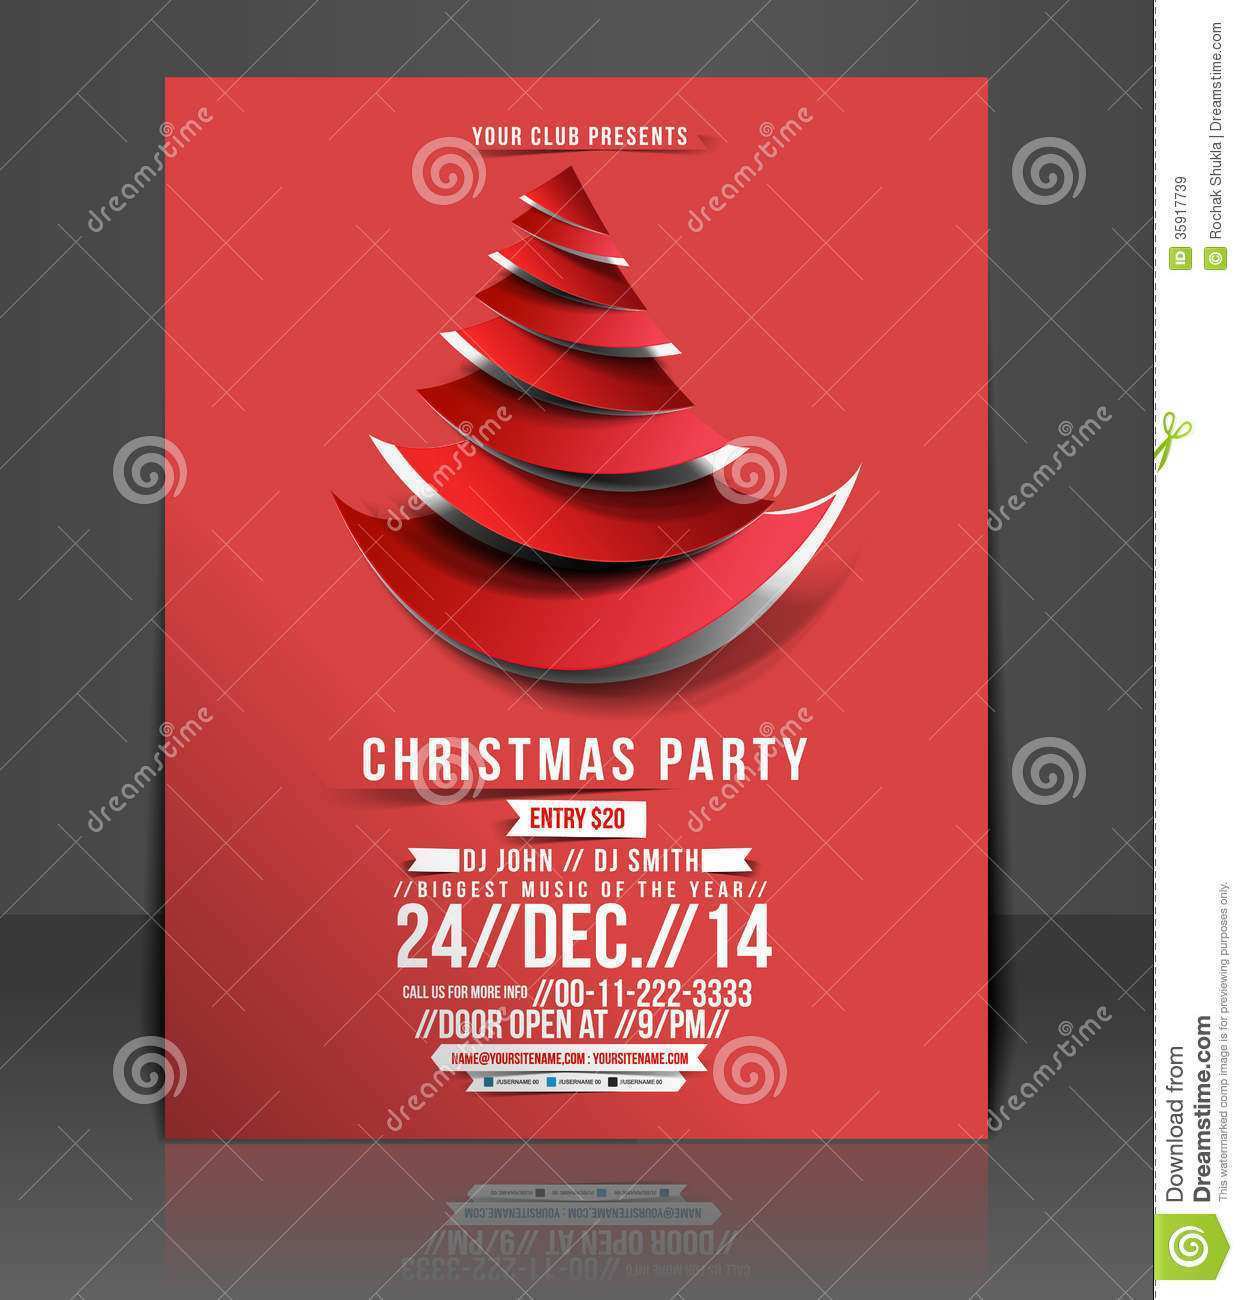 41 Report Christmas Party Flyer Template Free in Photoshop by Christmas Party Flyer Template Free